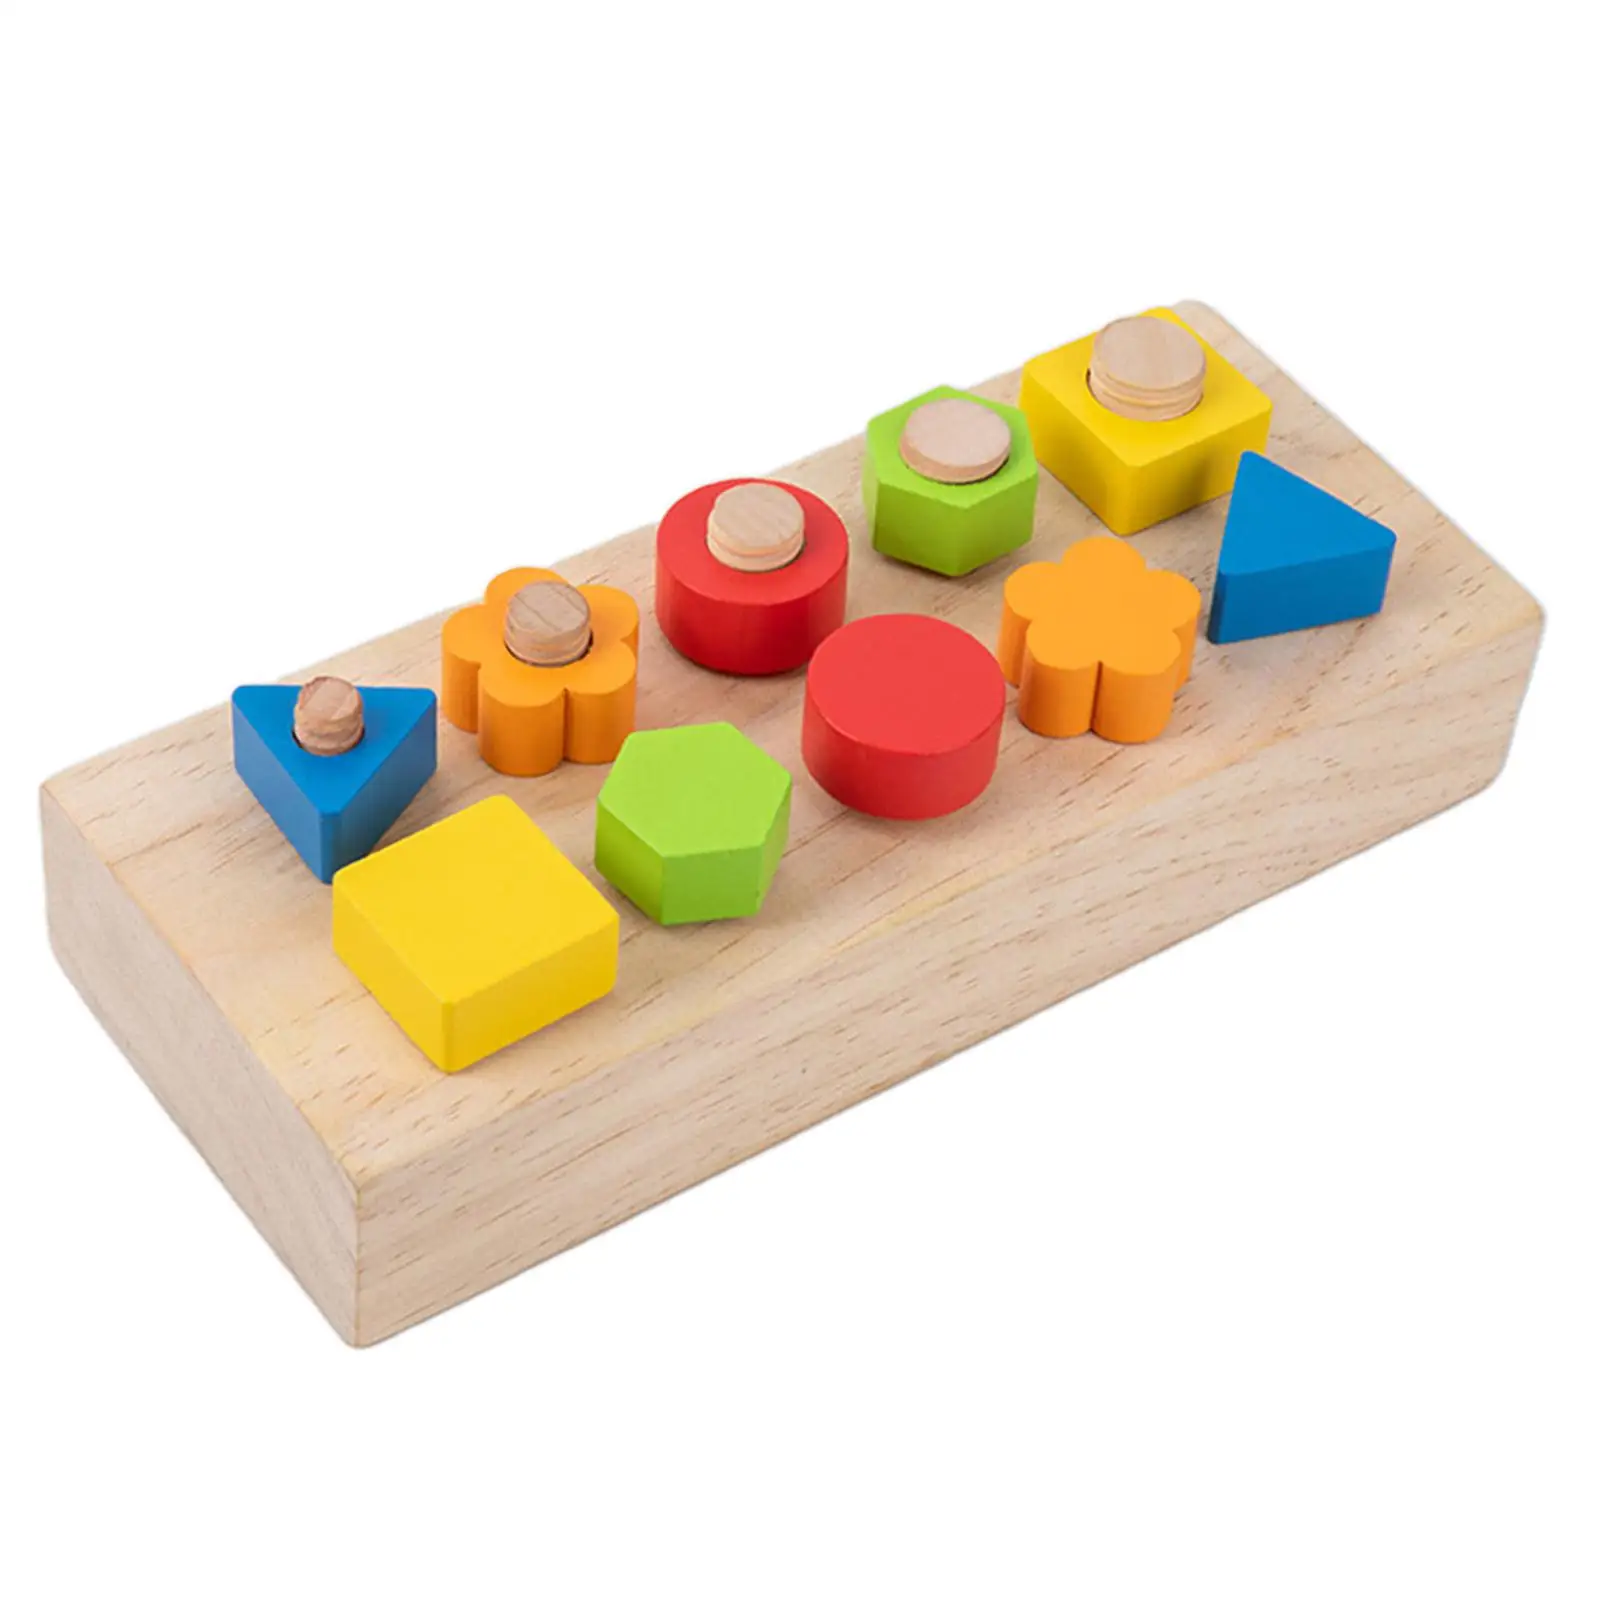 Montessori Wood Nuts and Bolts Board  Material Color &  , Developing Brain Power Develop  Gifts